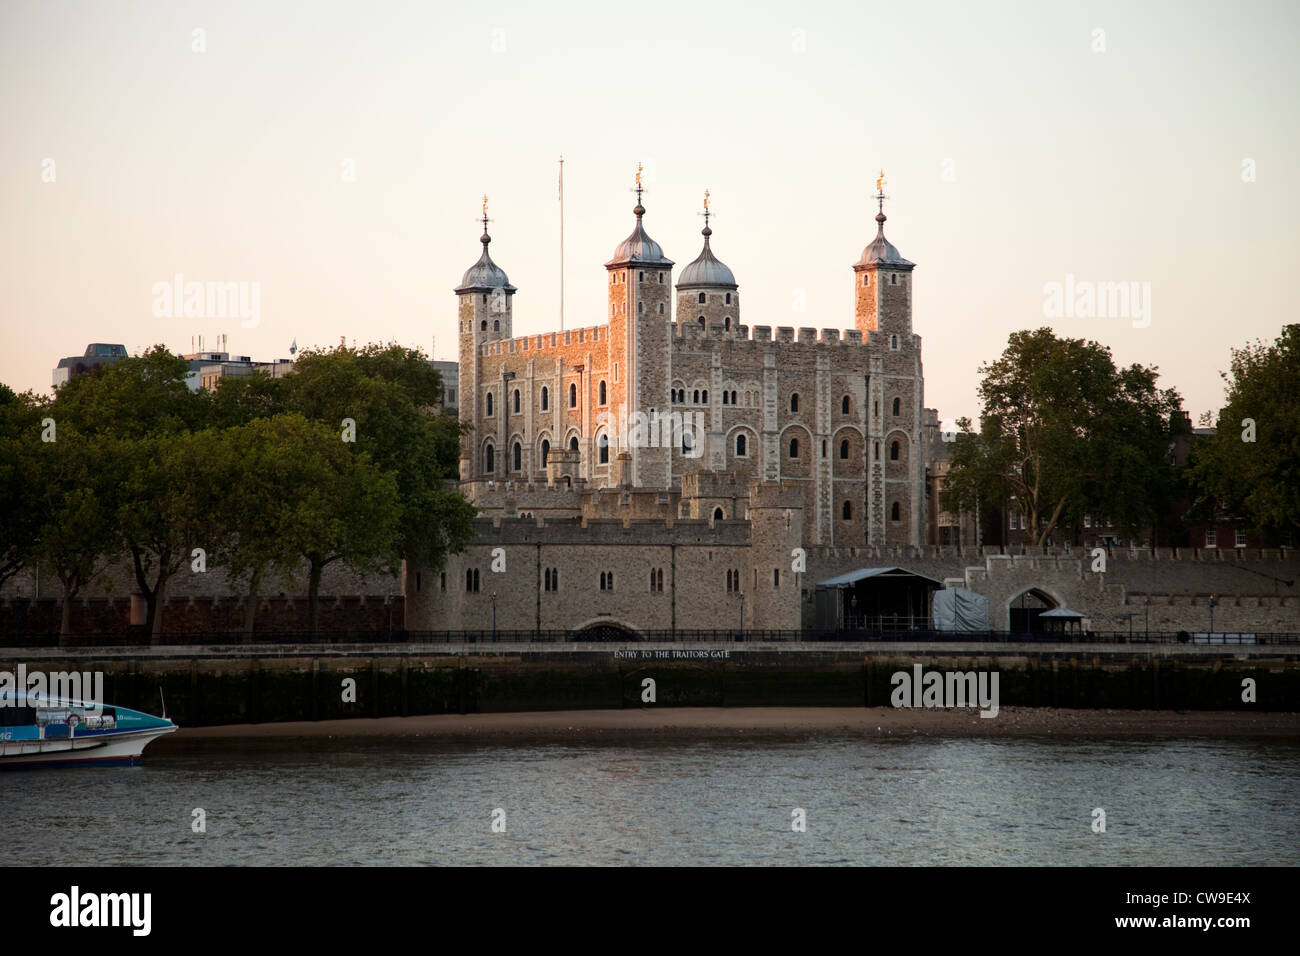 The Tower of London on the north bank of the Thames near Tower Bridge at dusk, London Stock Photo